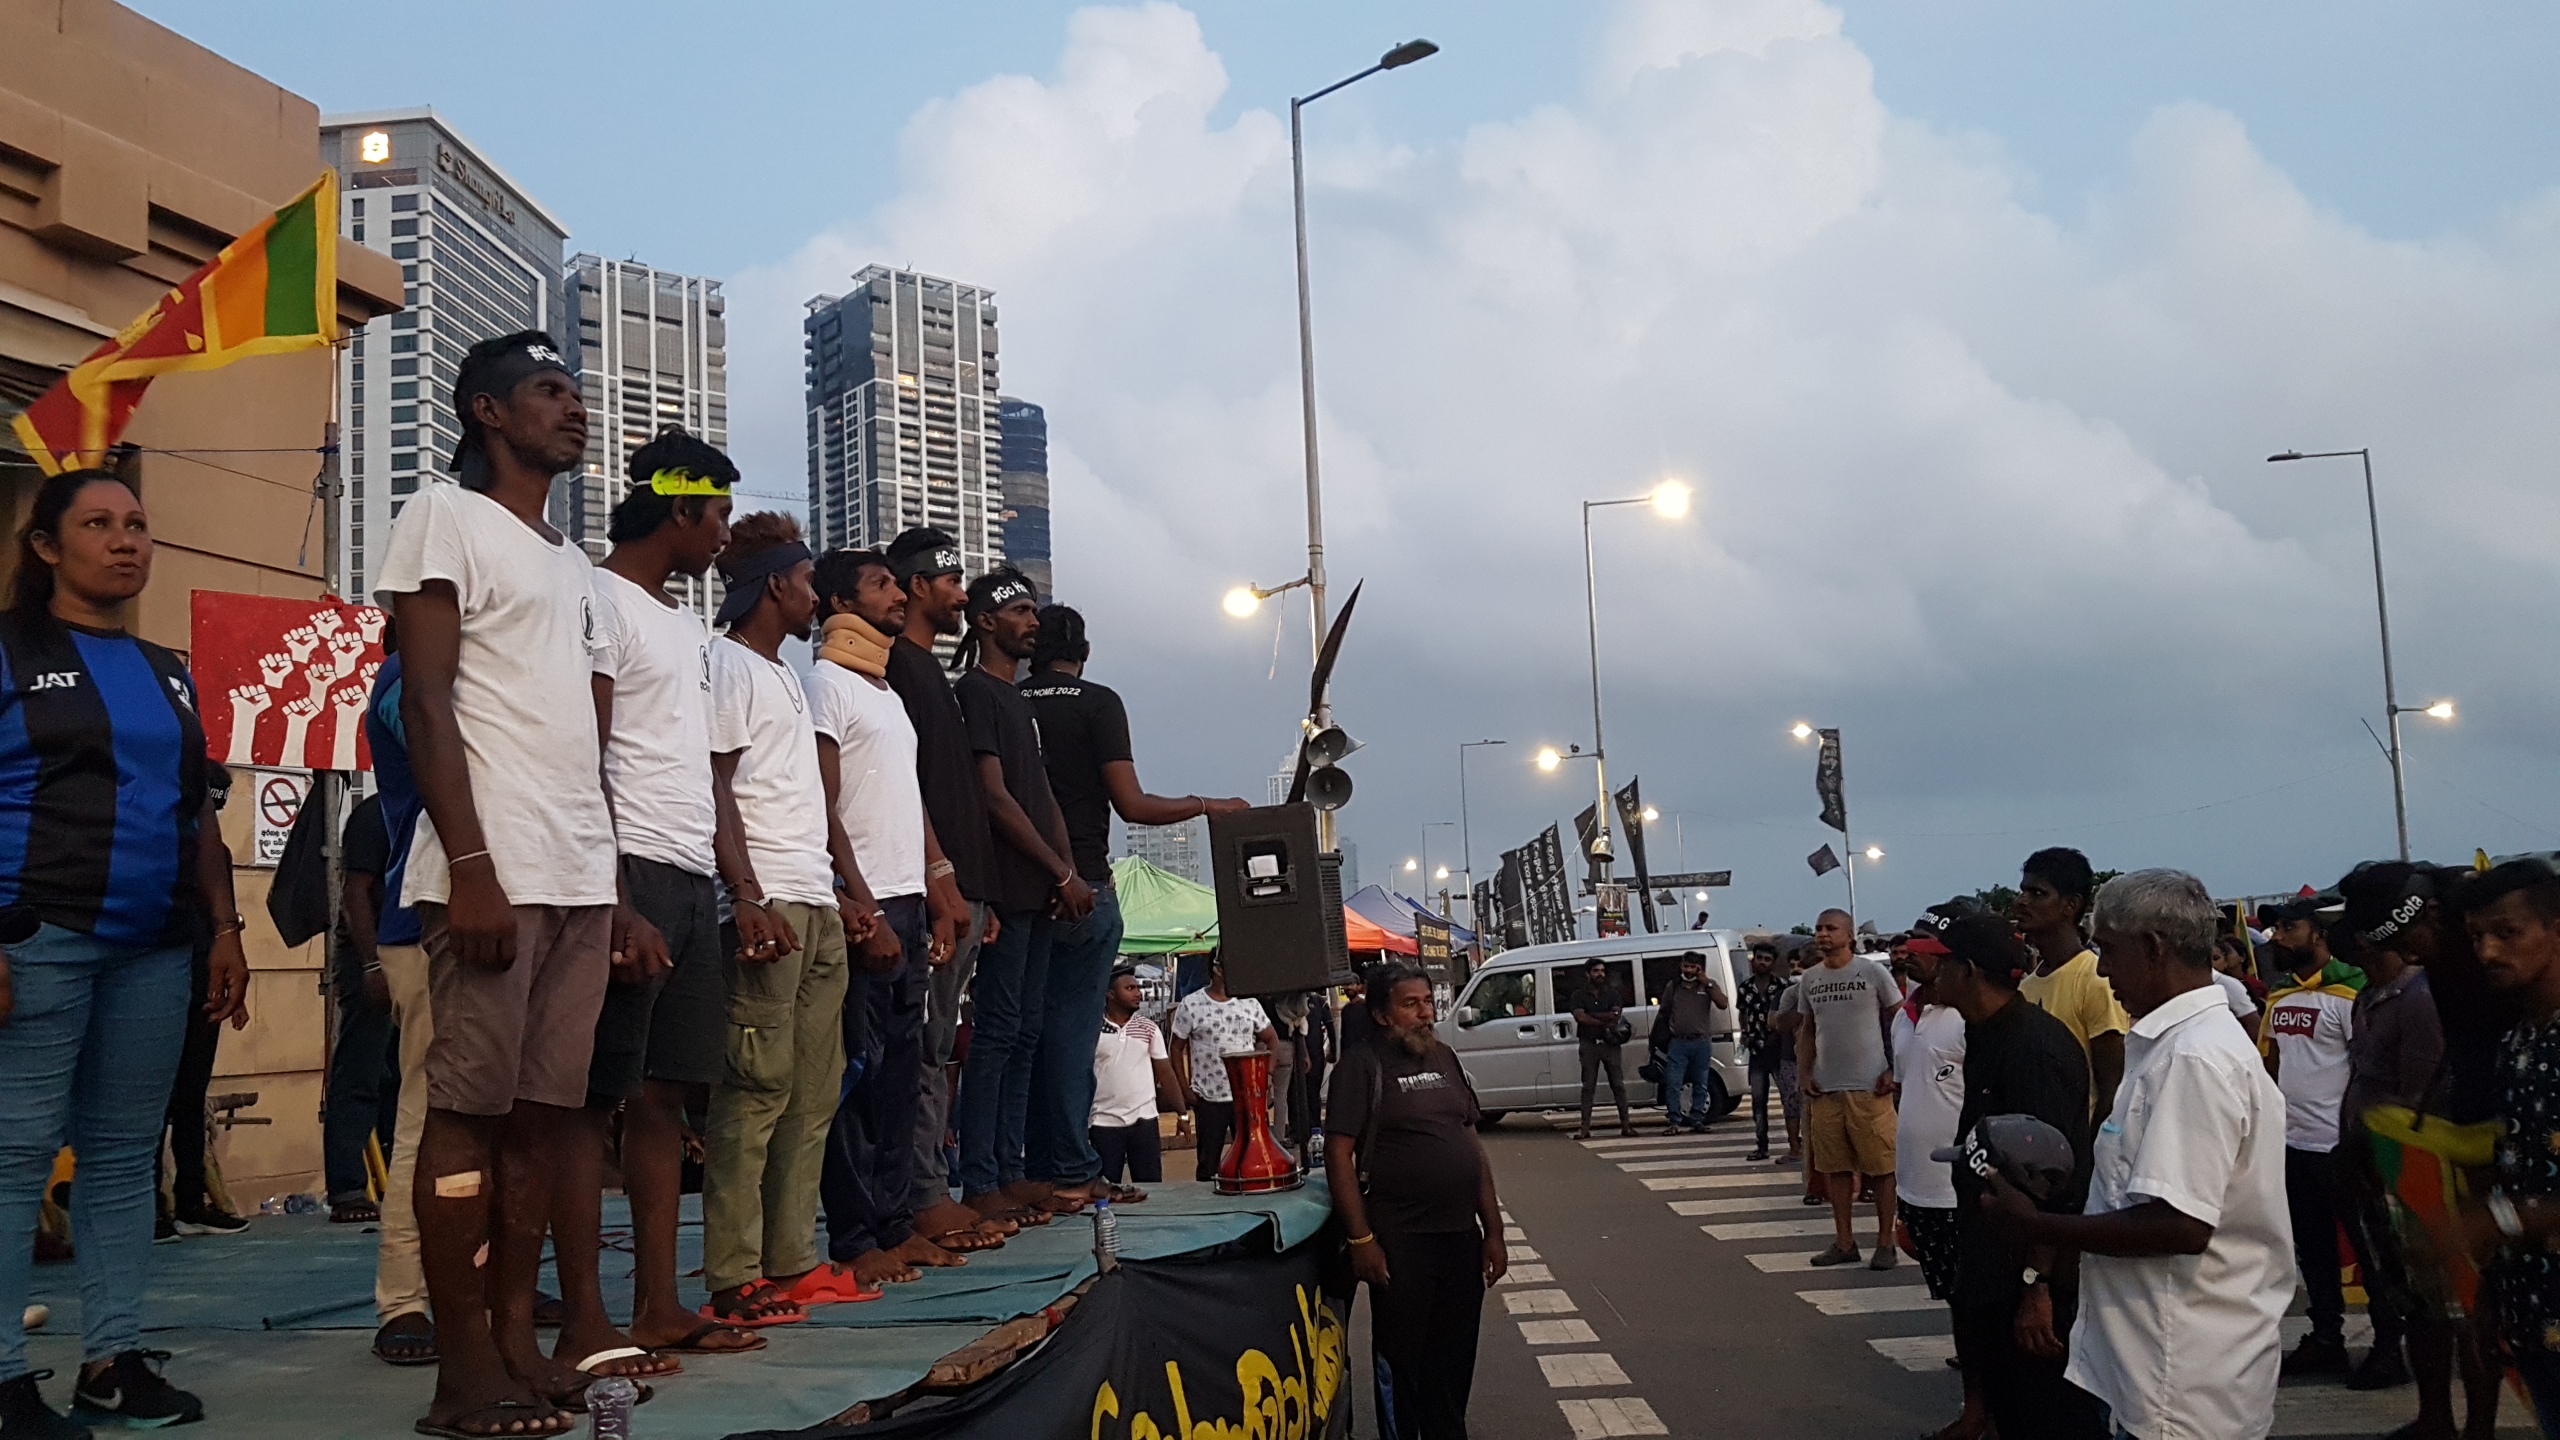 Protestors injured in the May 9th attack return to Galle Face, and stand on the stage at the barricade. Image credit: Amalini De Sayrah